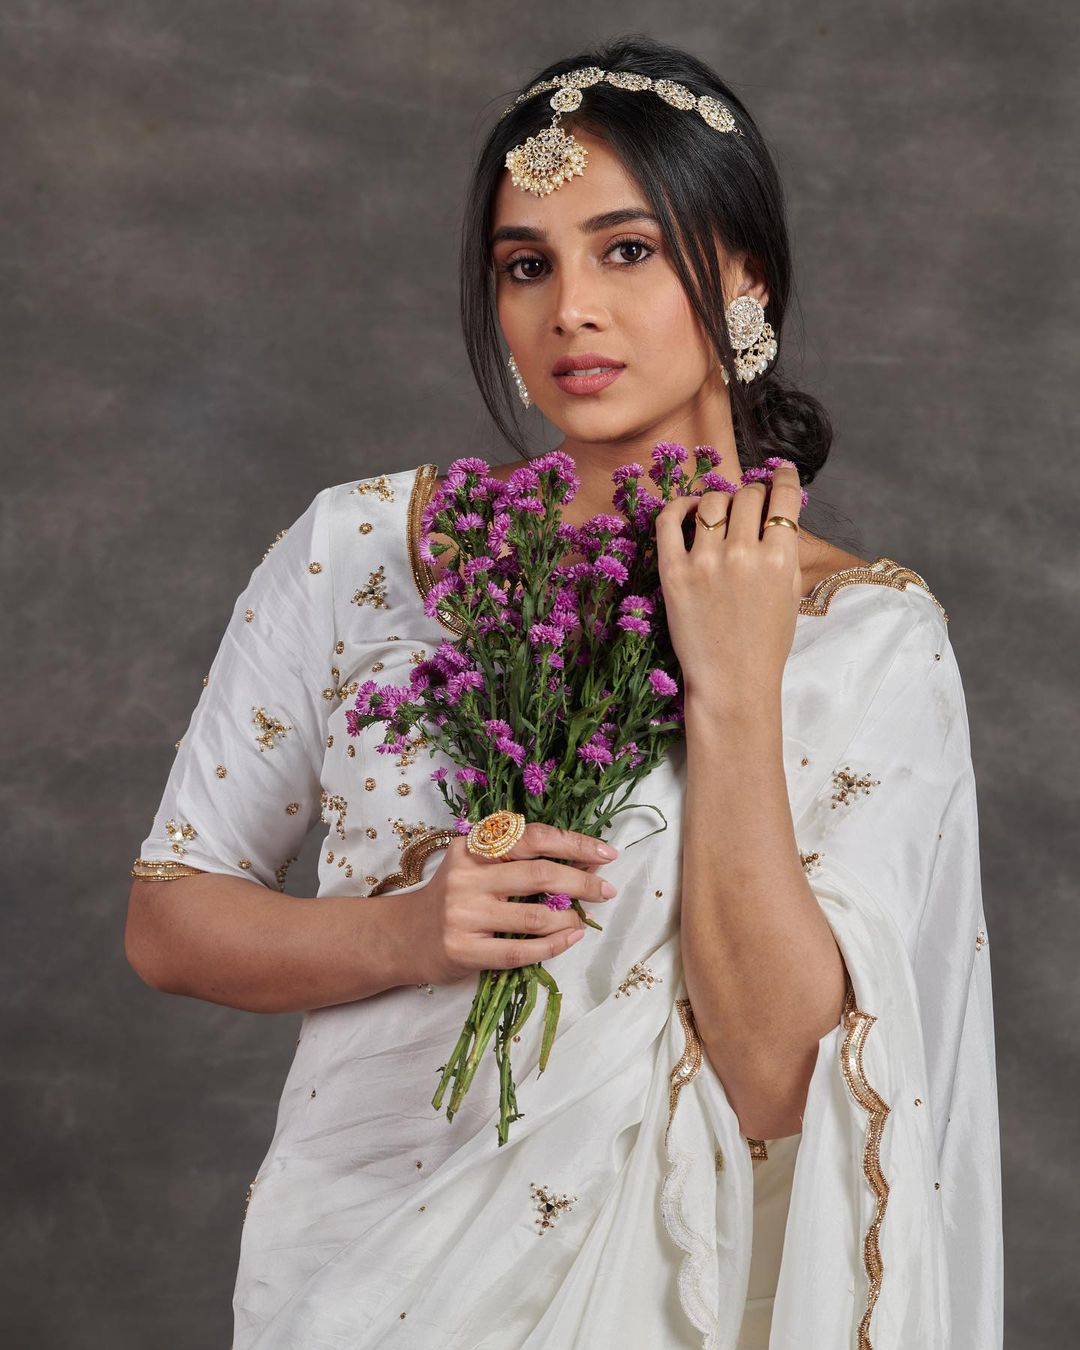 Stunning Actress Sayli Salunke Talks About Her Career Journey: “When I Look Back At Myself From 10 Years Ago, I Feel A Sense Of Pride, I Think”. Read What More She Added!